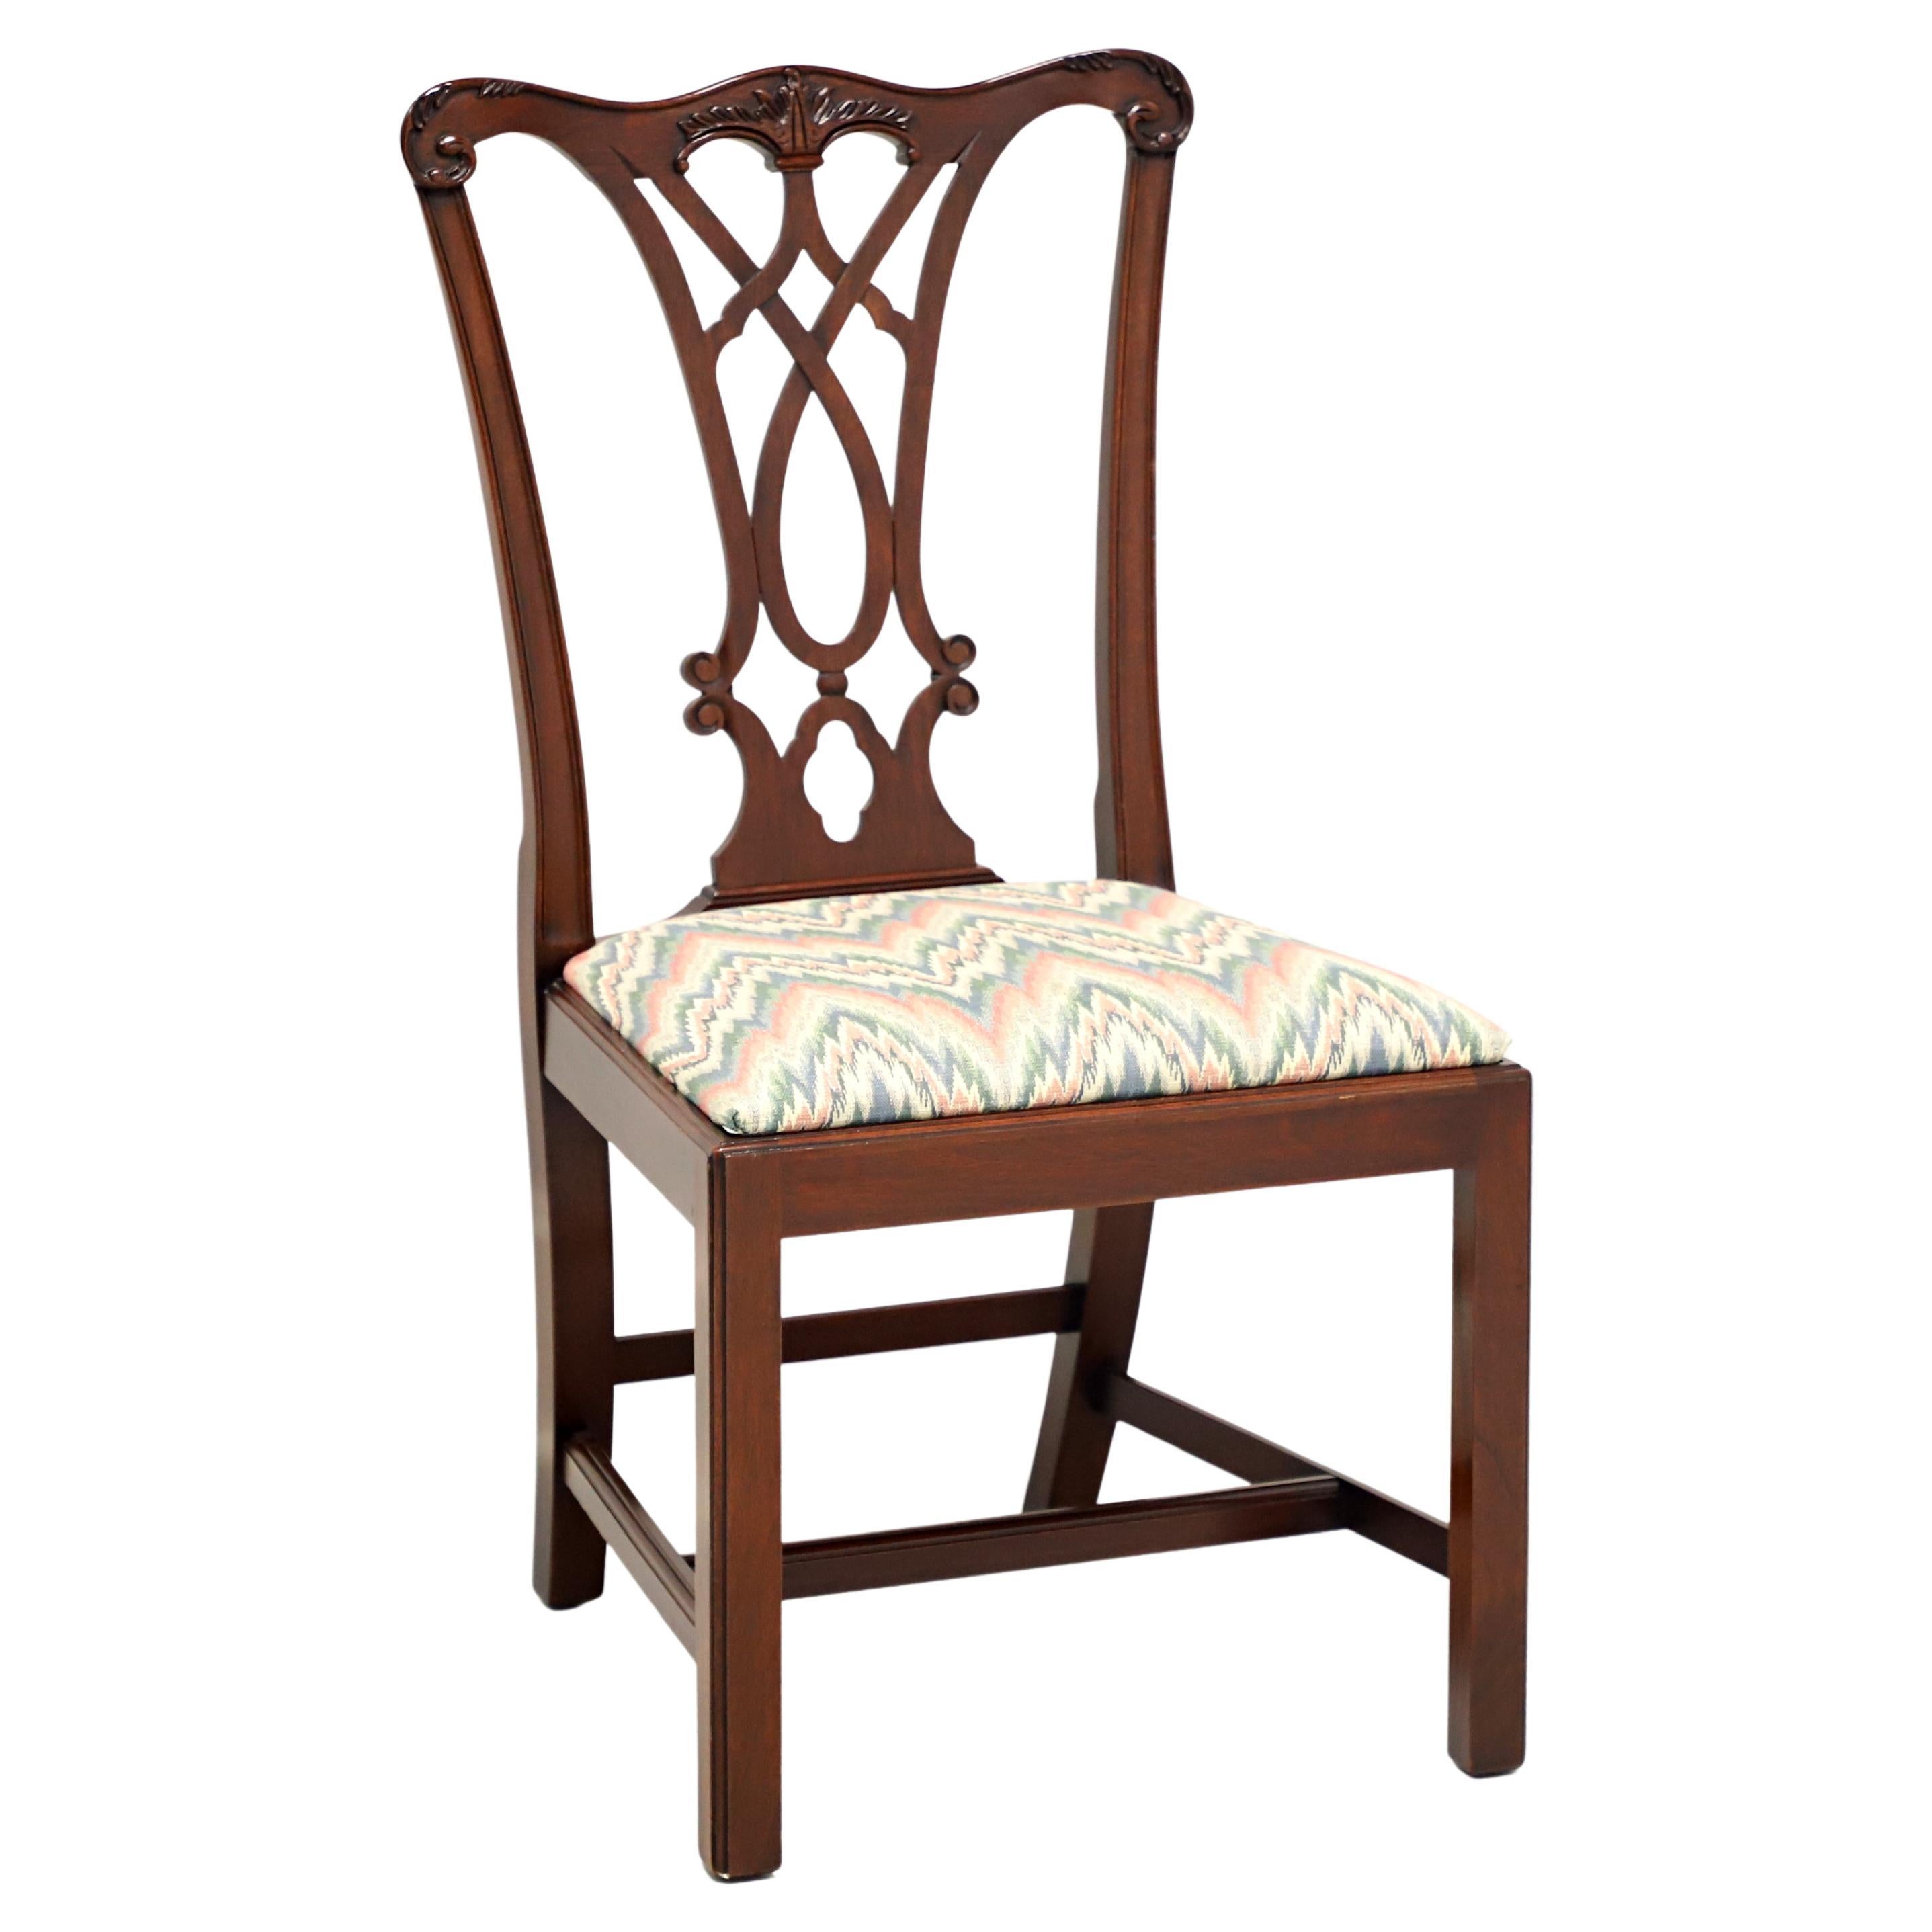 HENKEL HARRIS 107S 29 Mahogany Chippendale Dining Side Chair